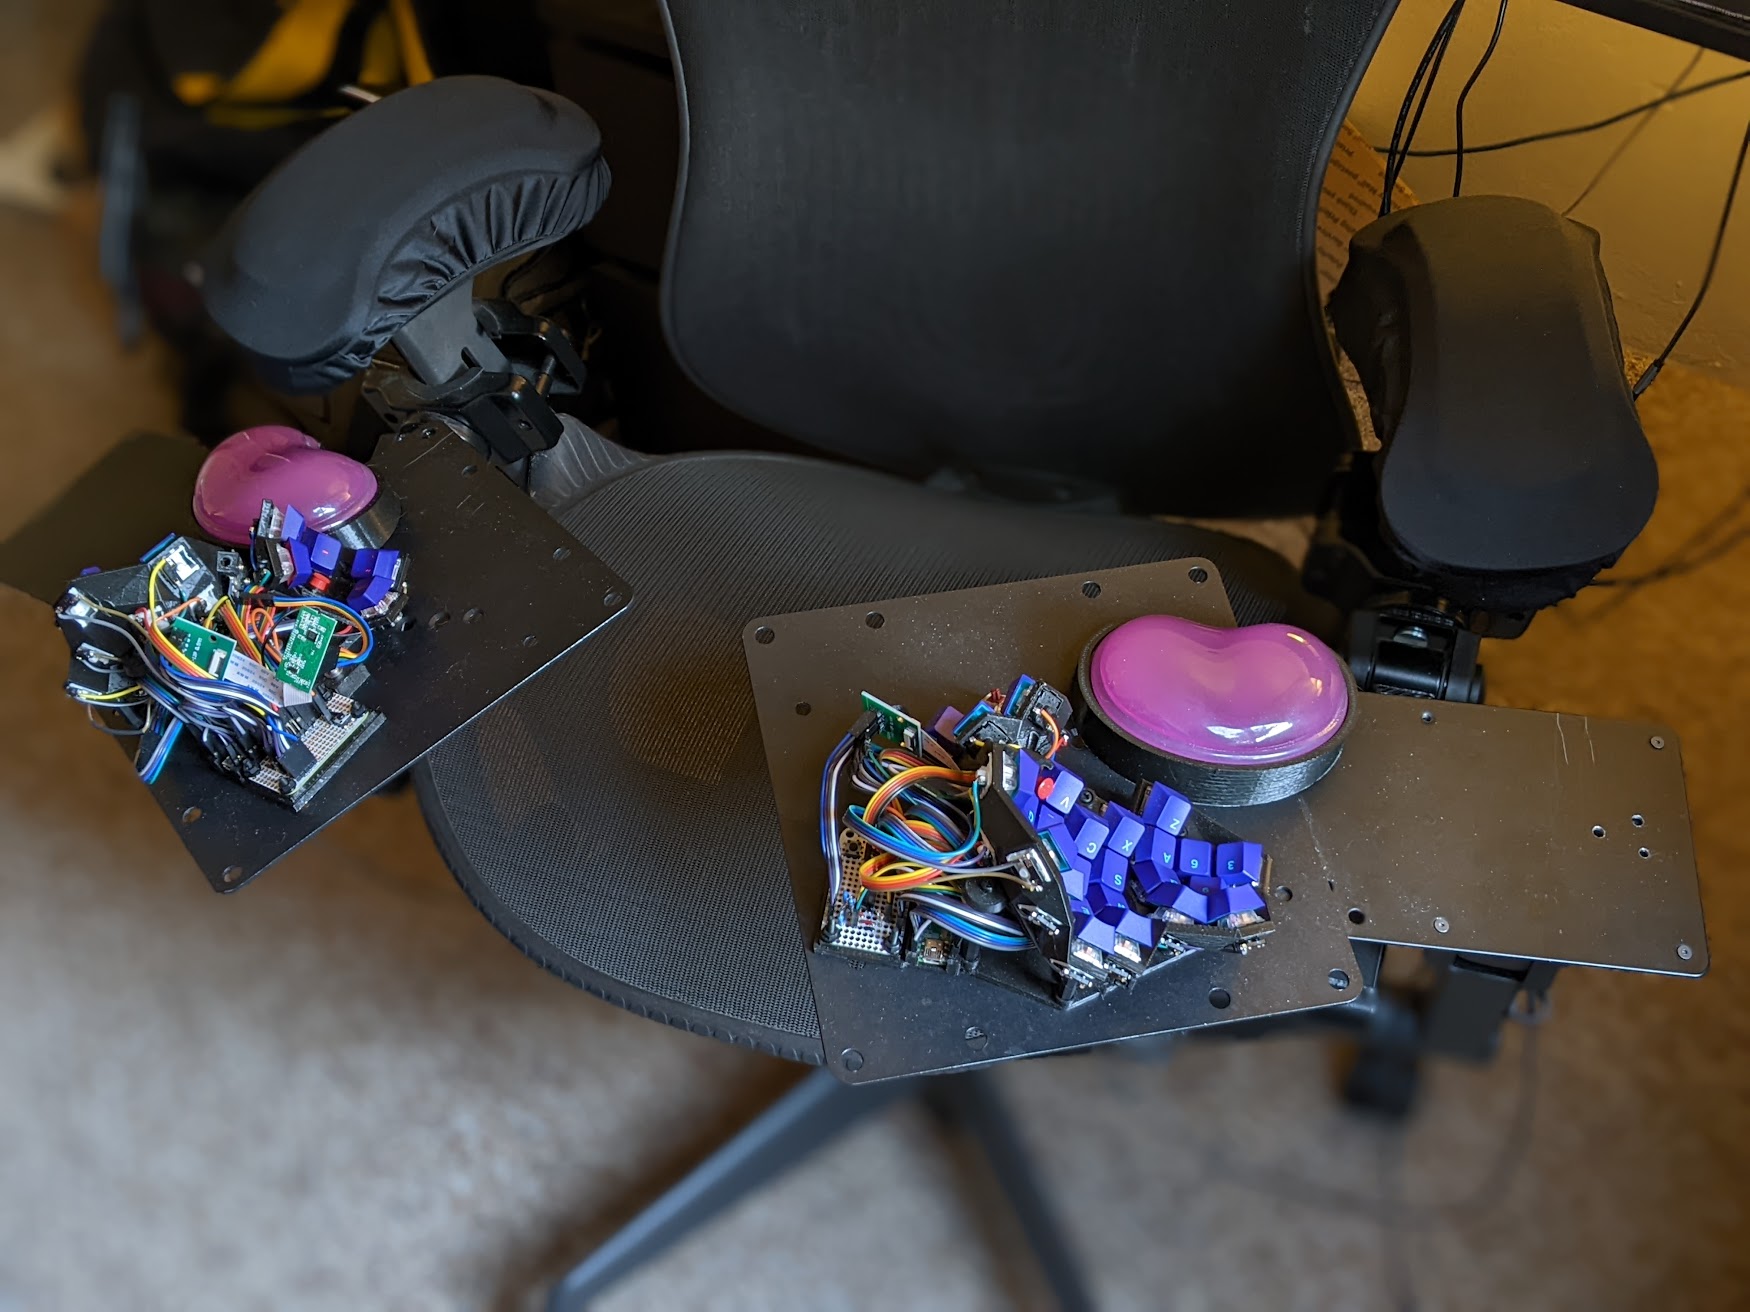 Facing the chair, keyboard and wrist rests magnetically attached to mount